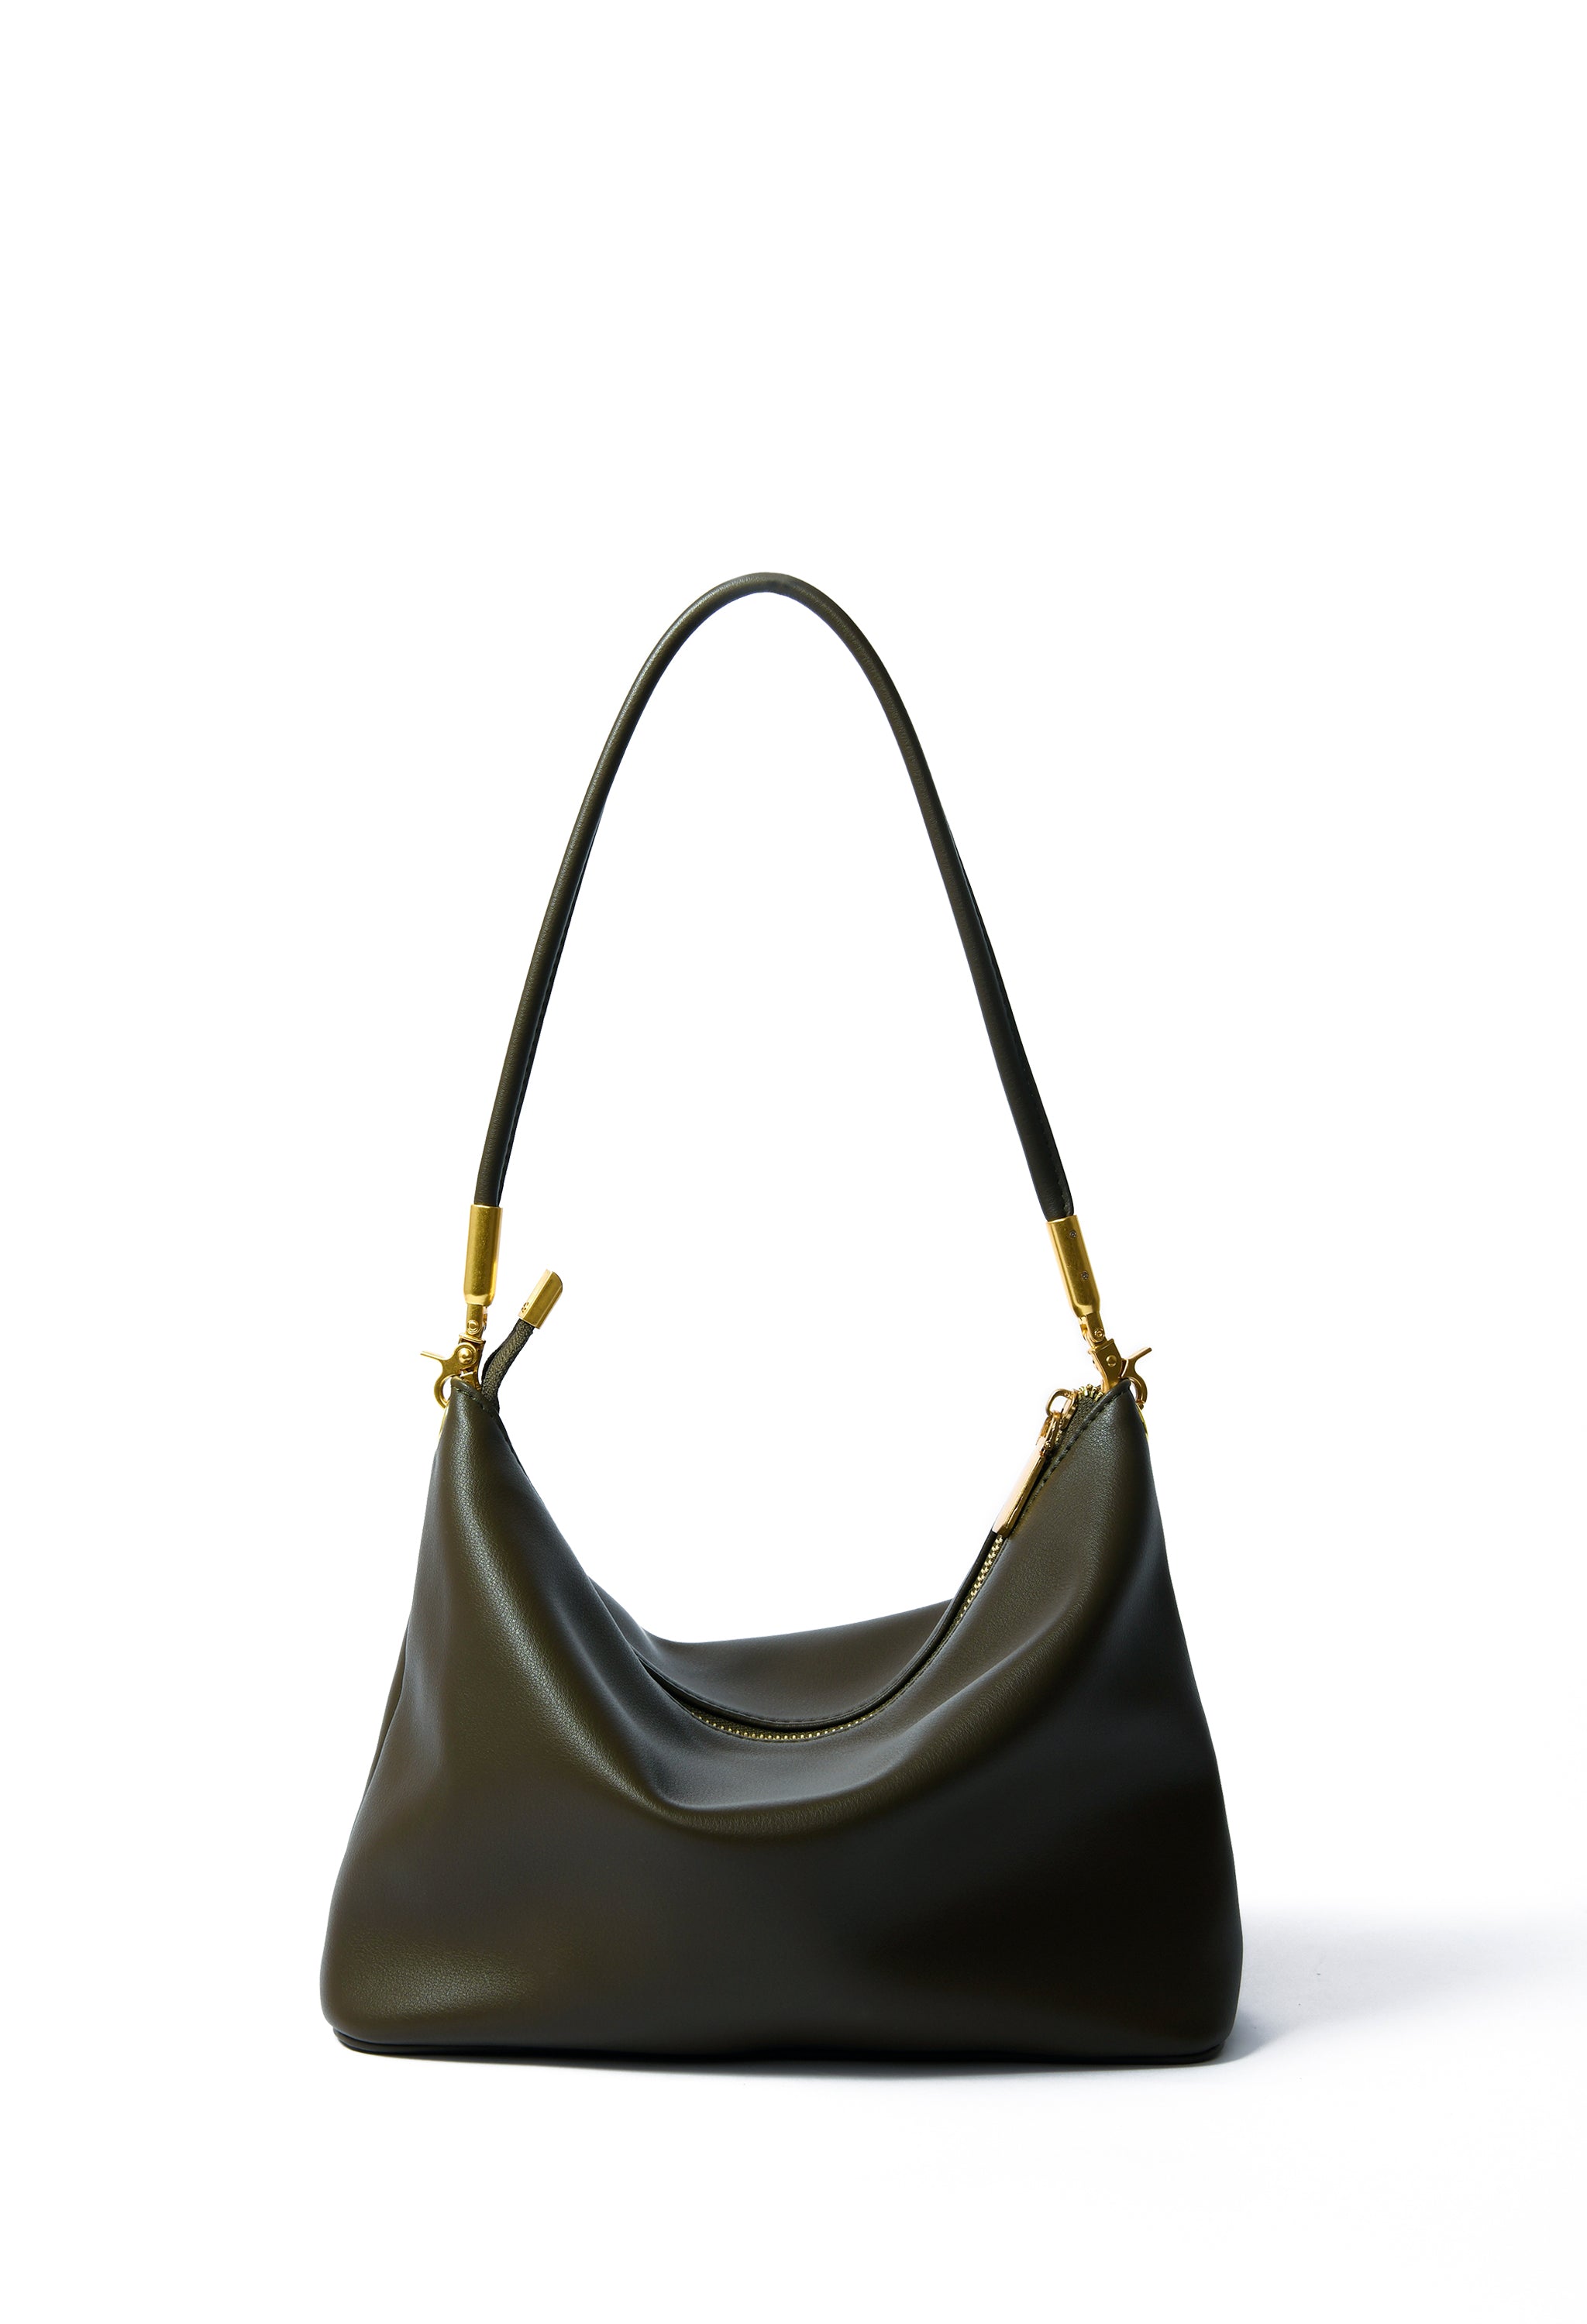 Aubrey Bag in smooth leather, Green